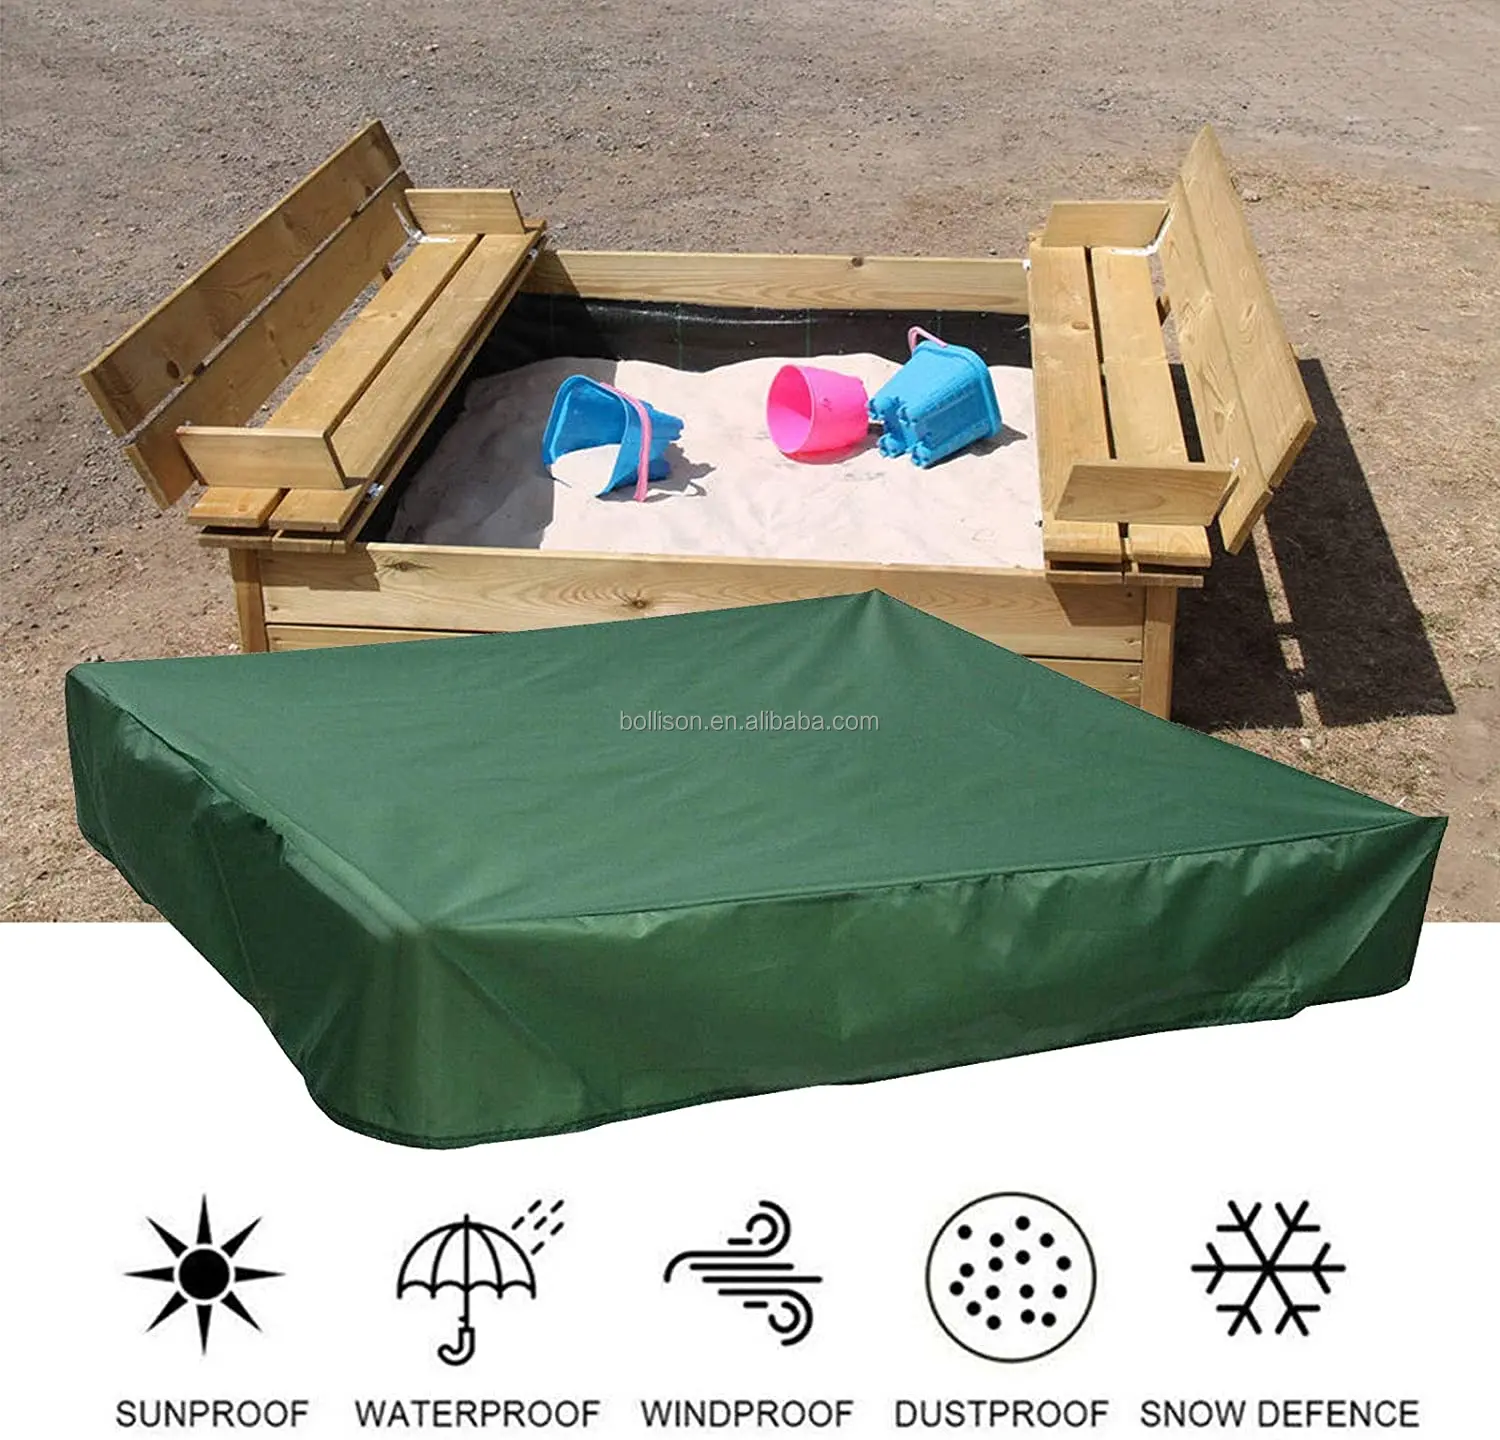 jaspenybow Sandbox Cover Square Dustproof Protection Sandbox Cover with Drawstring Waterproof Sandpit Pool Cover 95 UV Resistant Childrens Toy Garden Small Pool Waterproof Sunshade